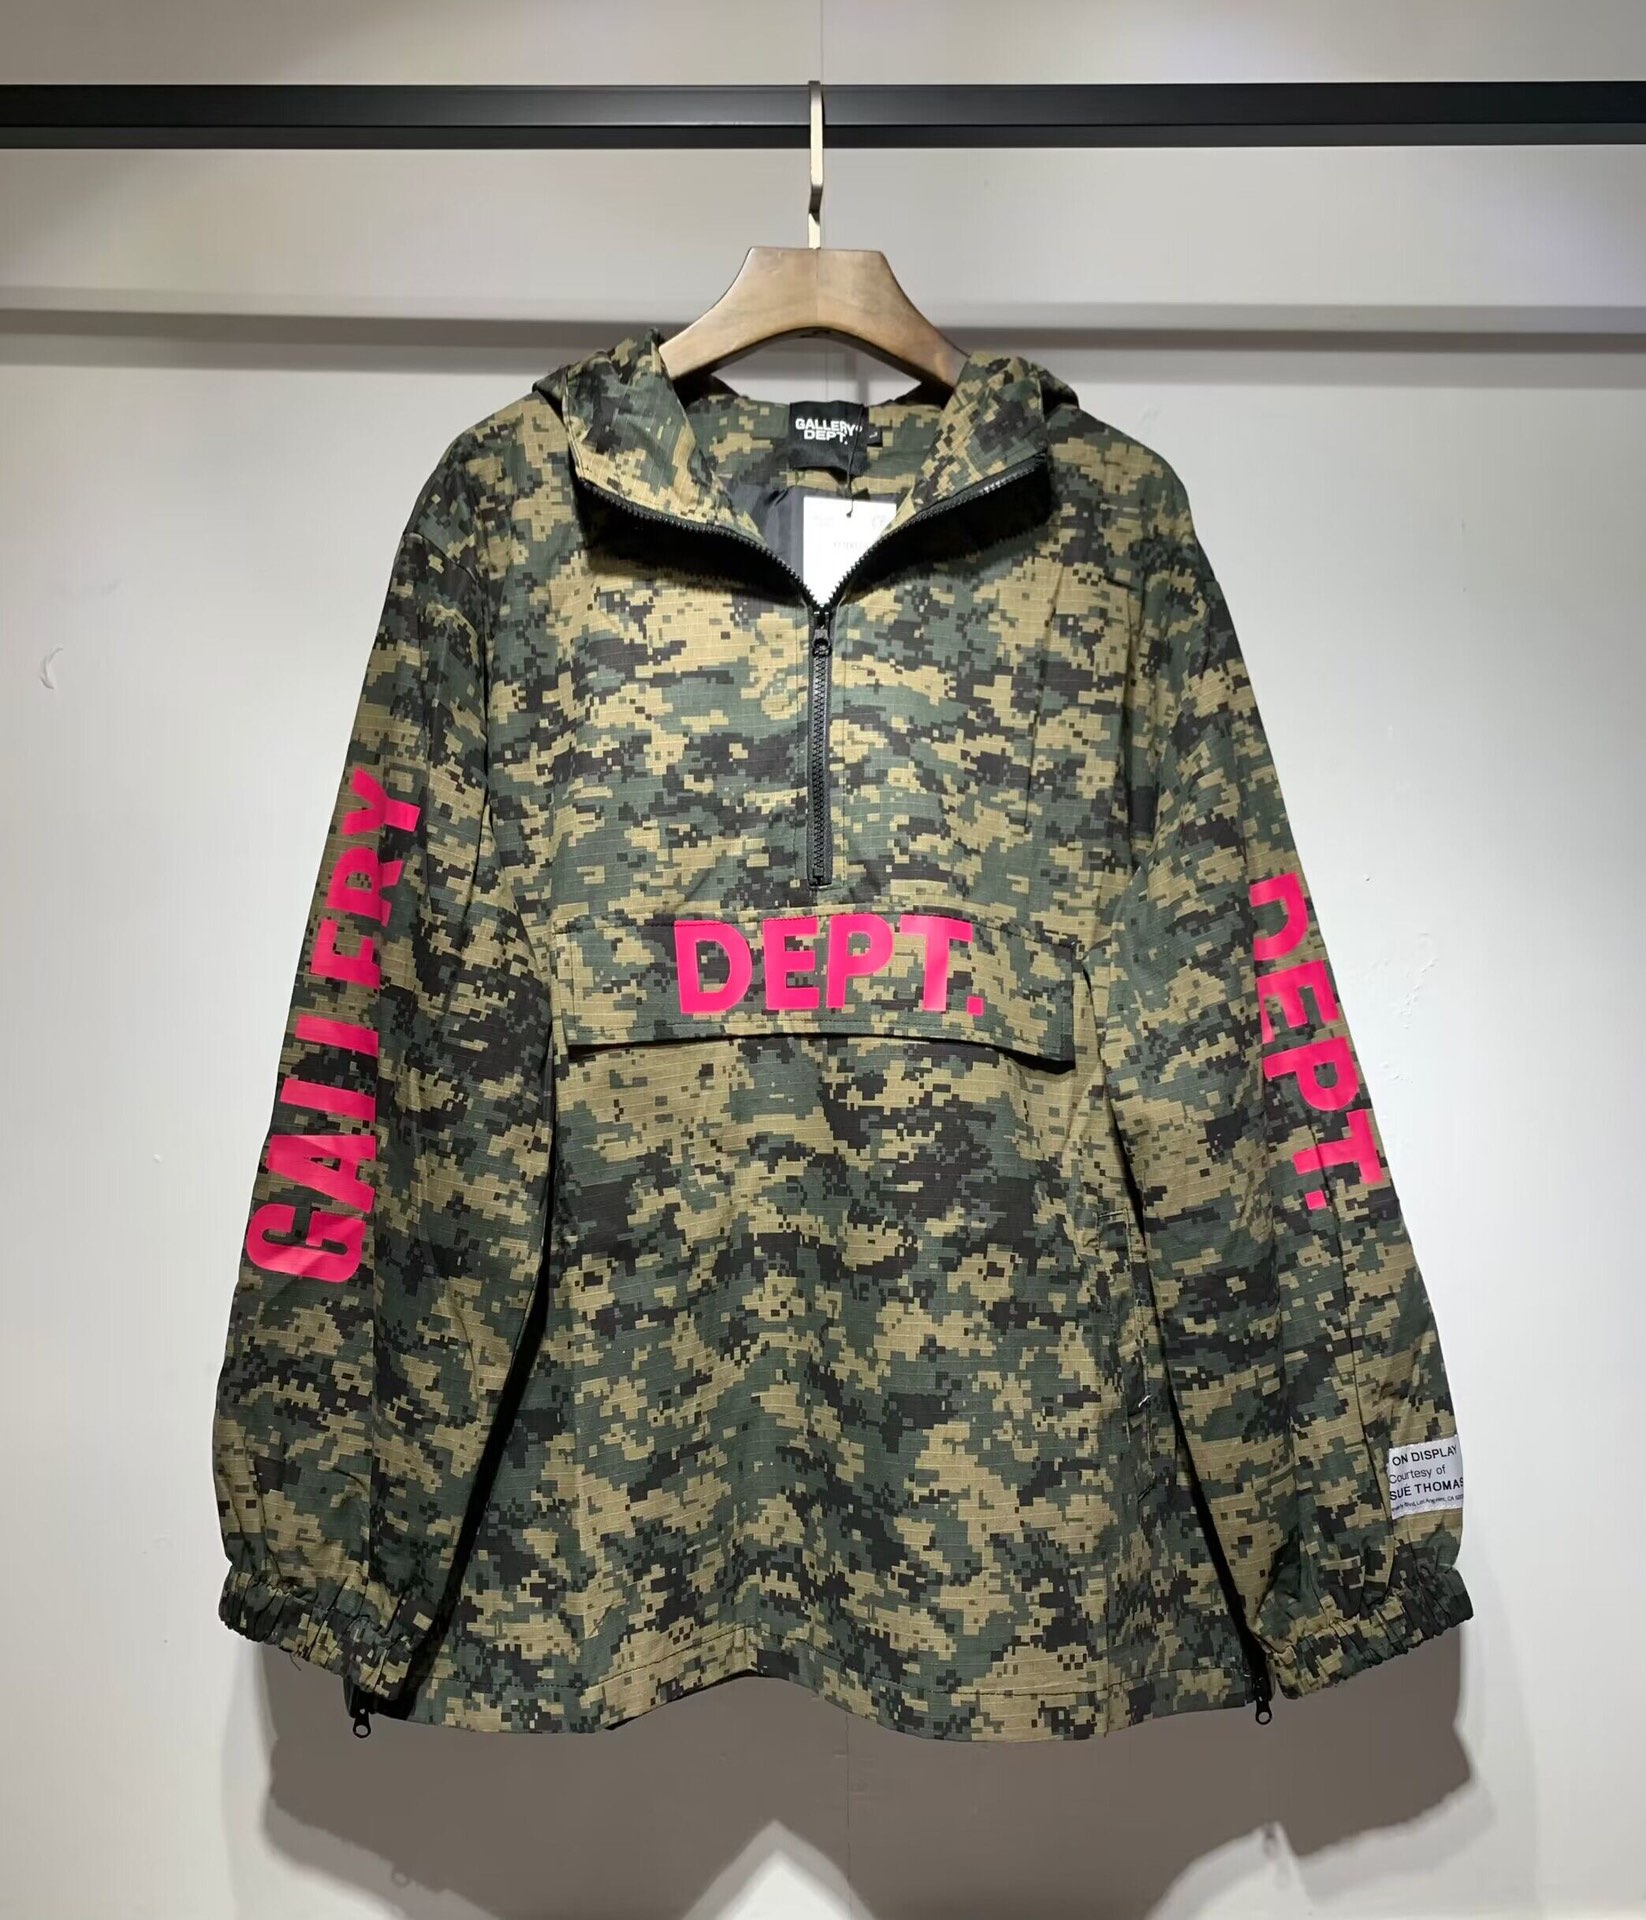 Gallery Dept Clothing Coats & Jackets Fall/Winter Collection Hooded Top